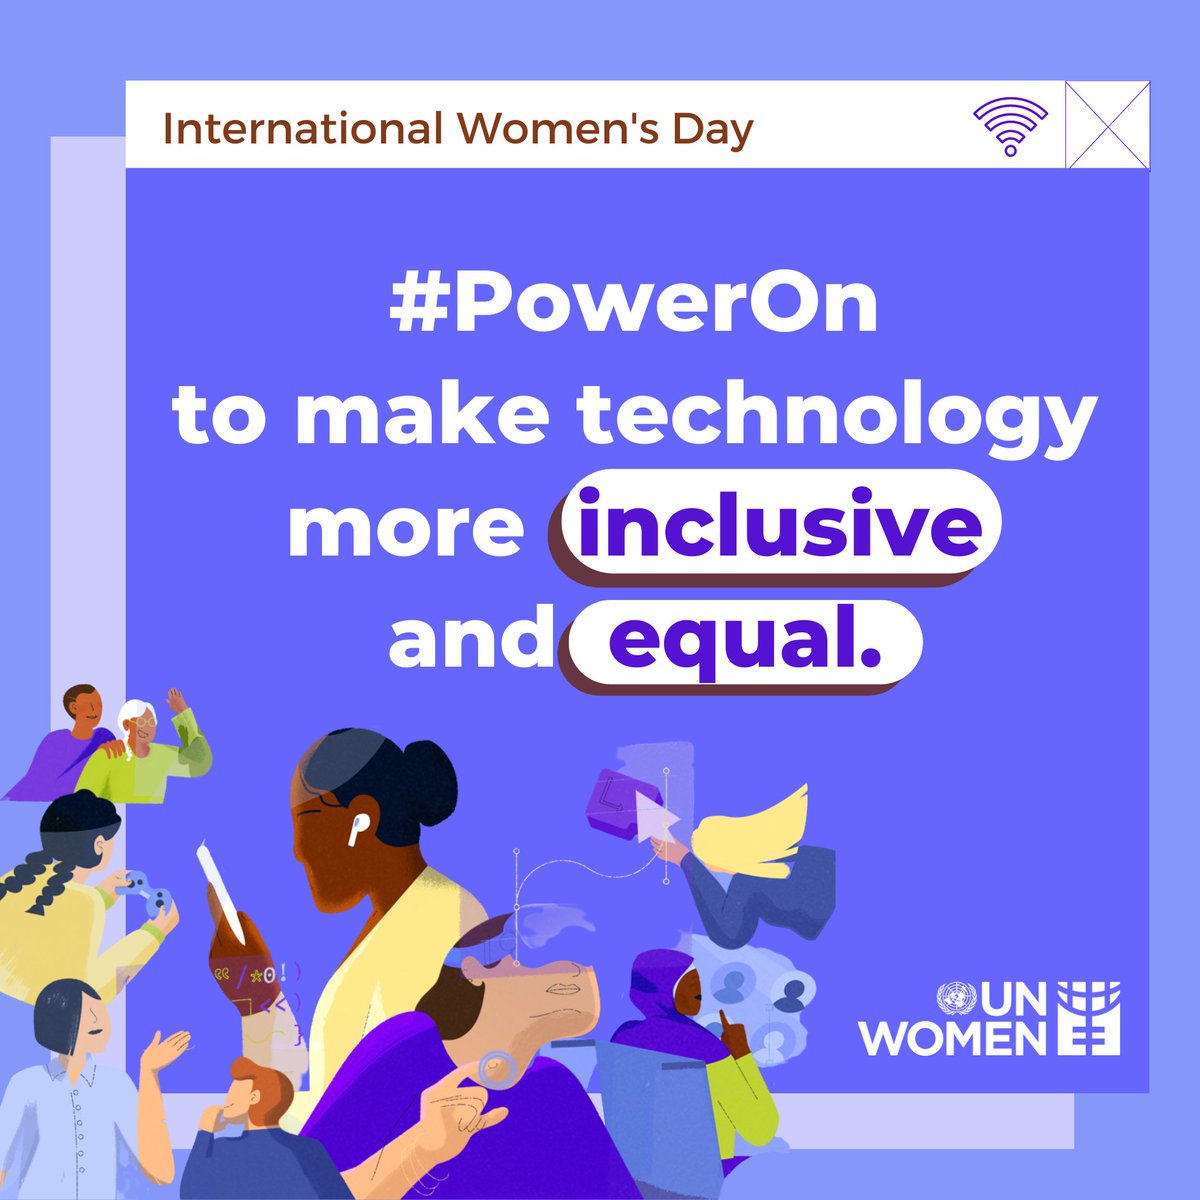 MILLIONS of women & girls will not see this message due to lack of digital access & literacy. Let's #PowerOn to give everyone an equal opportunity to access the Internet. Here is a thread of fantastic regional stories highlighting their path to taking up space in technology